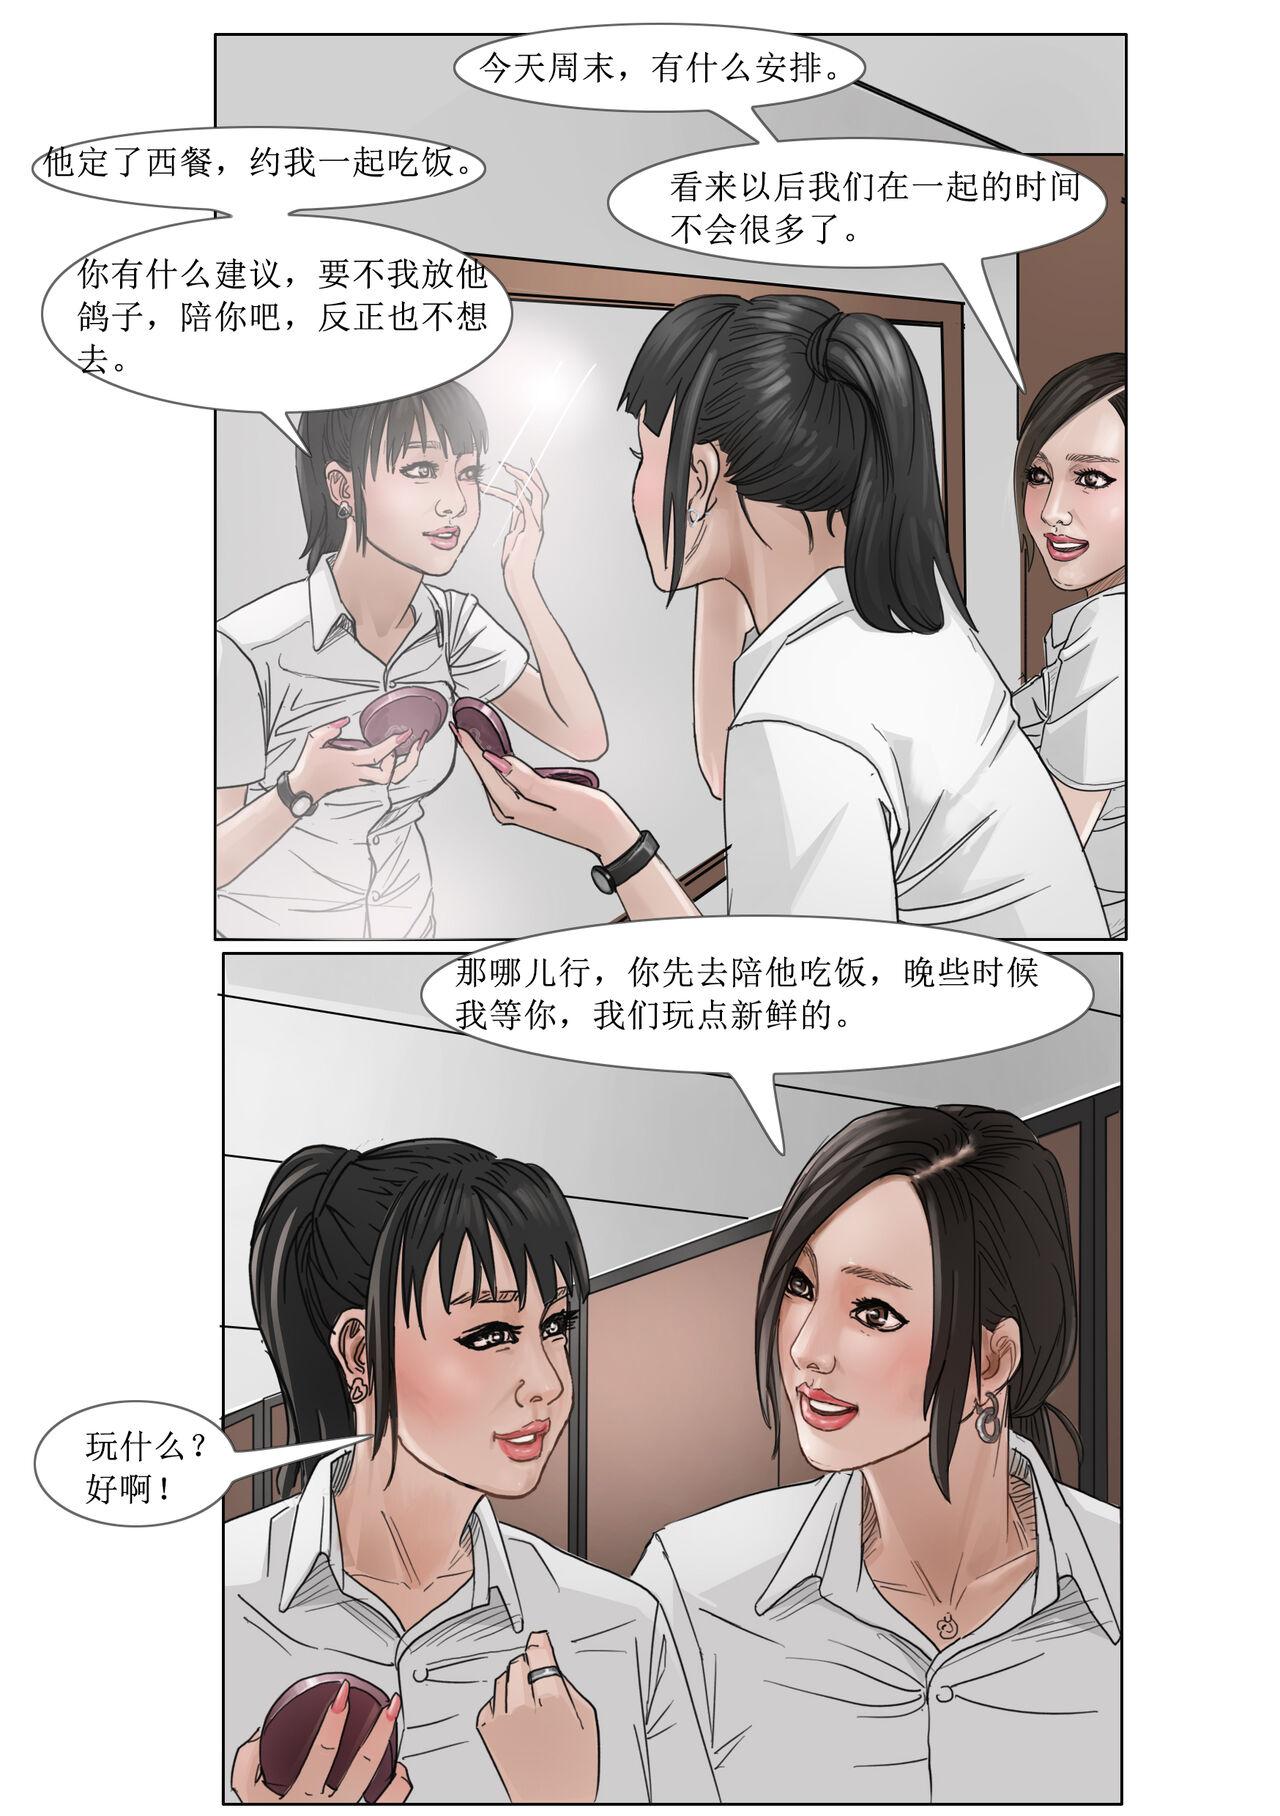 Scandal 枫语Foryou《阿花与阿朵》第一话 A hua and A duo 1 Chinese Wet Pussy - Page 10